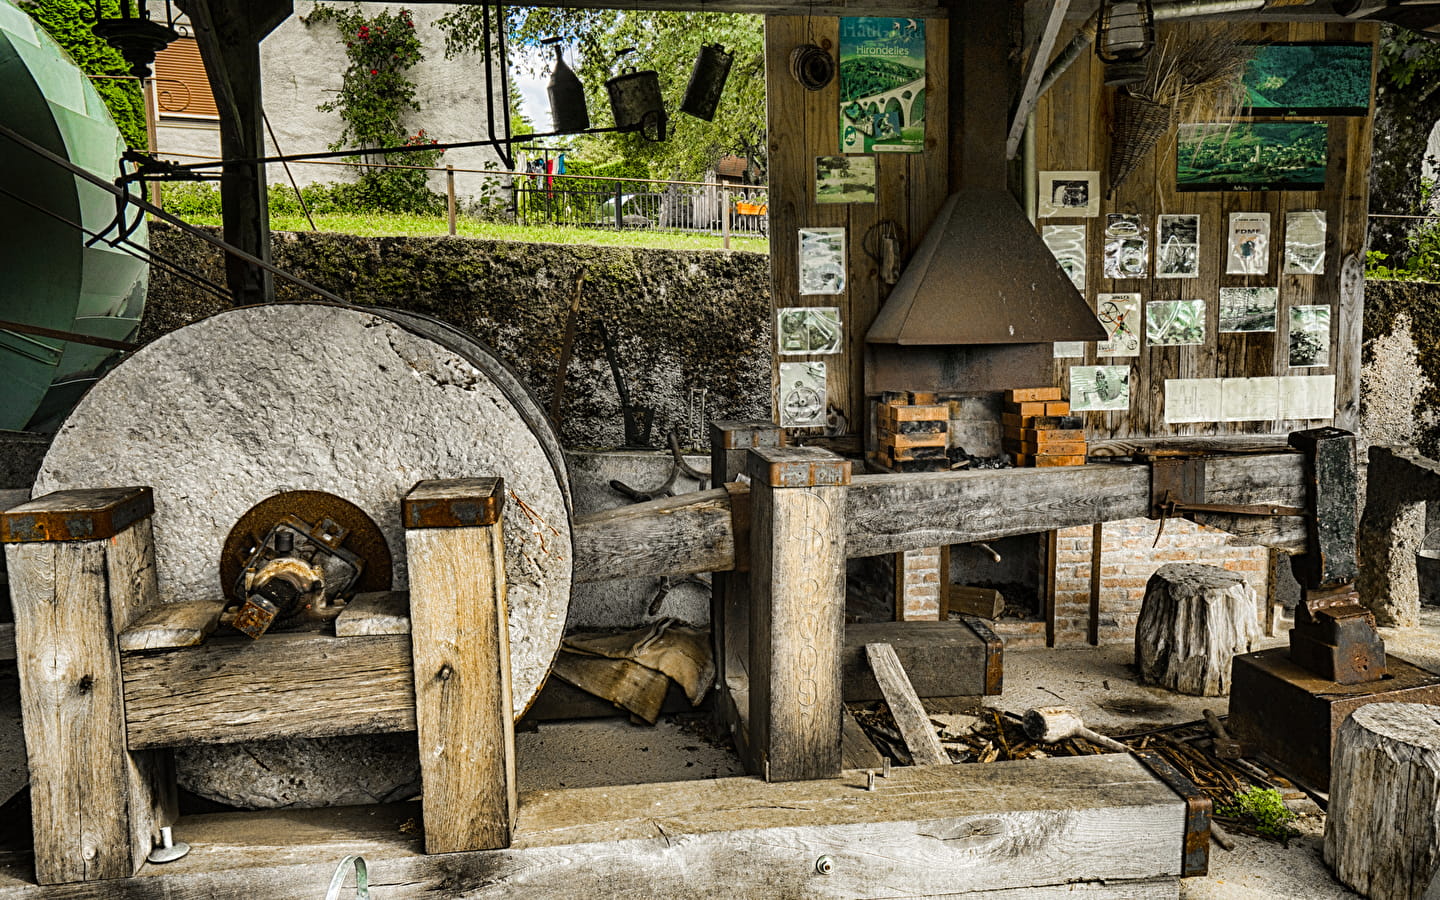 Visit to the Forge du Moulin